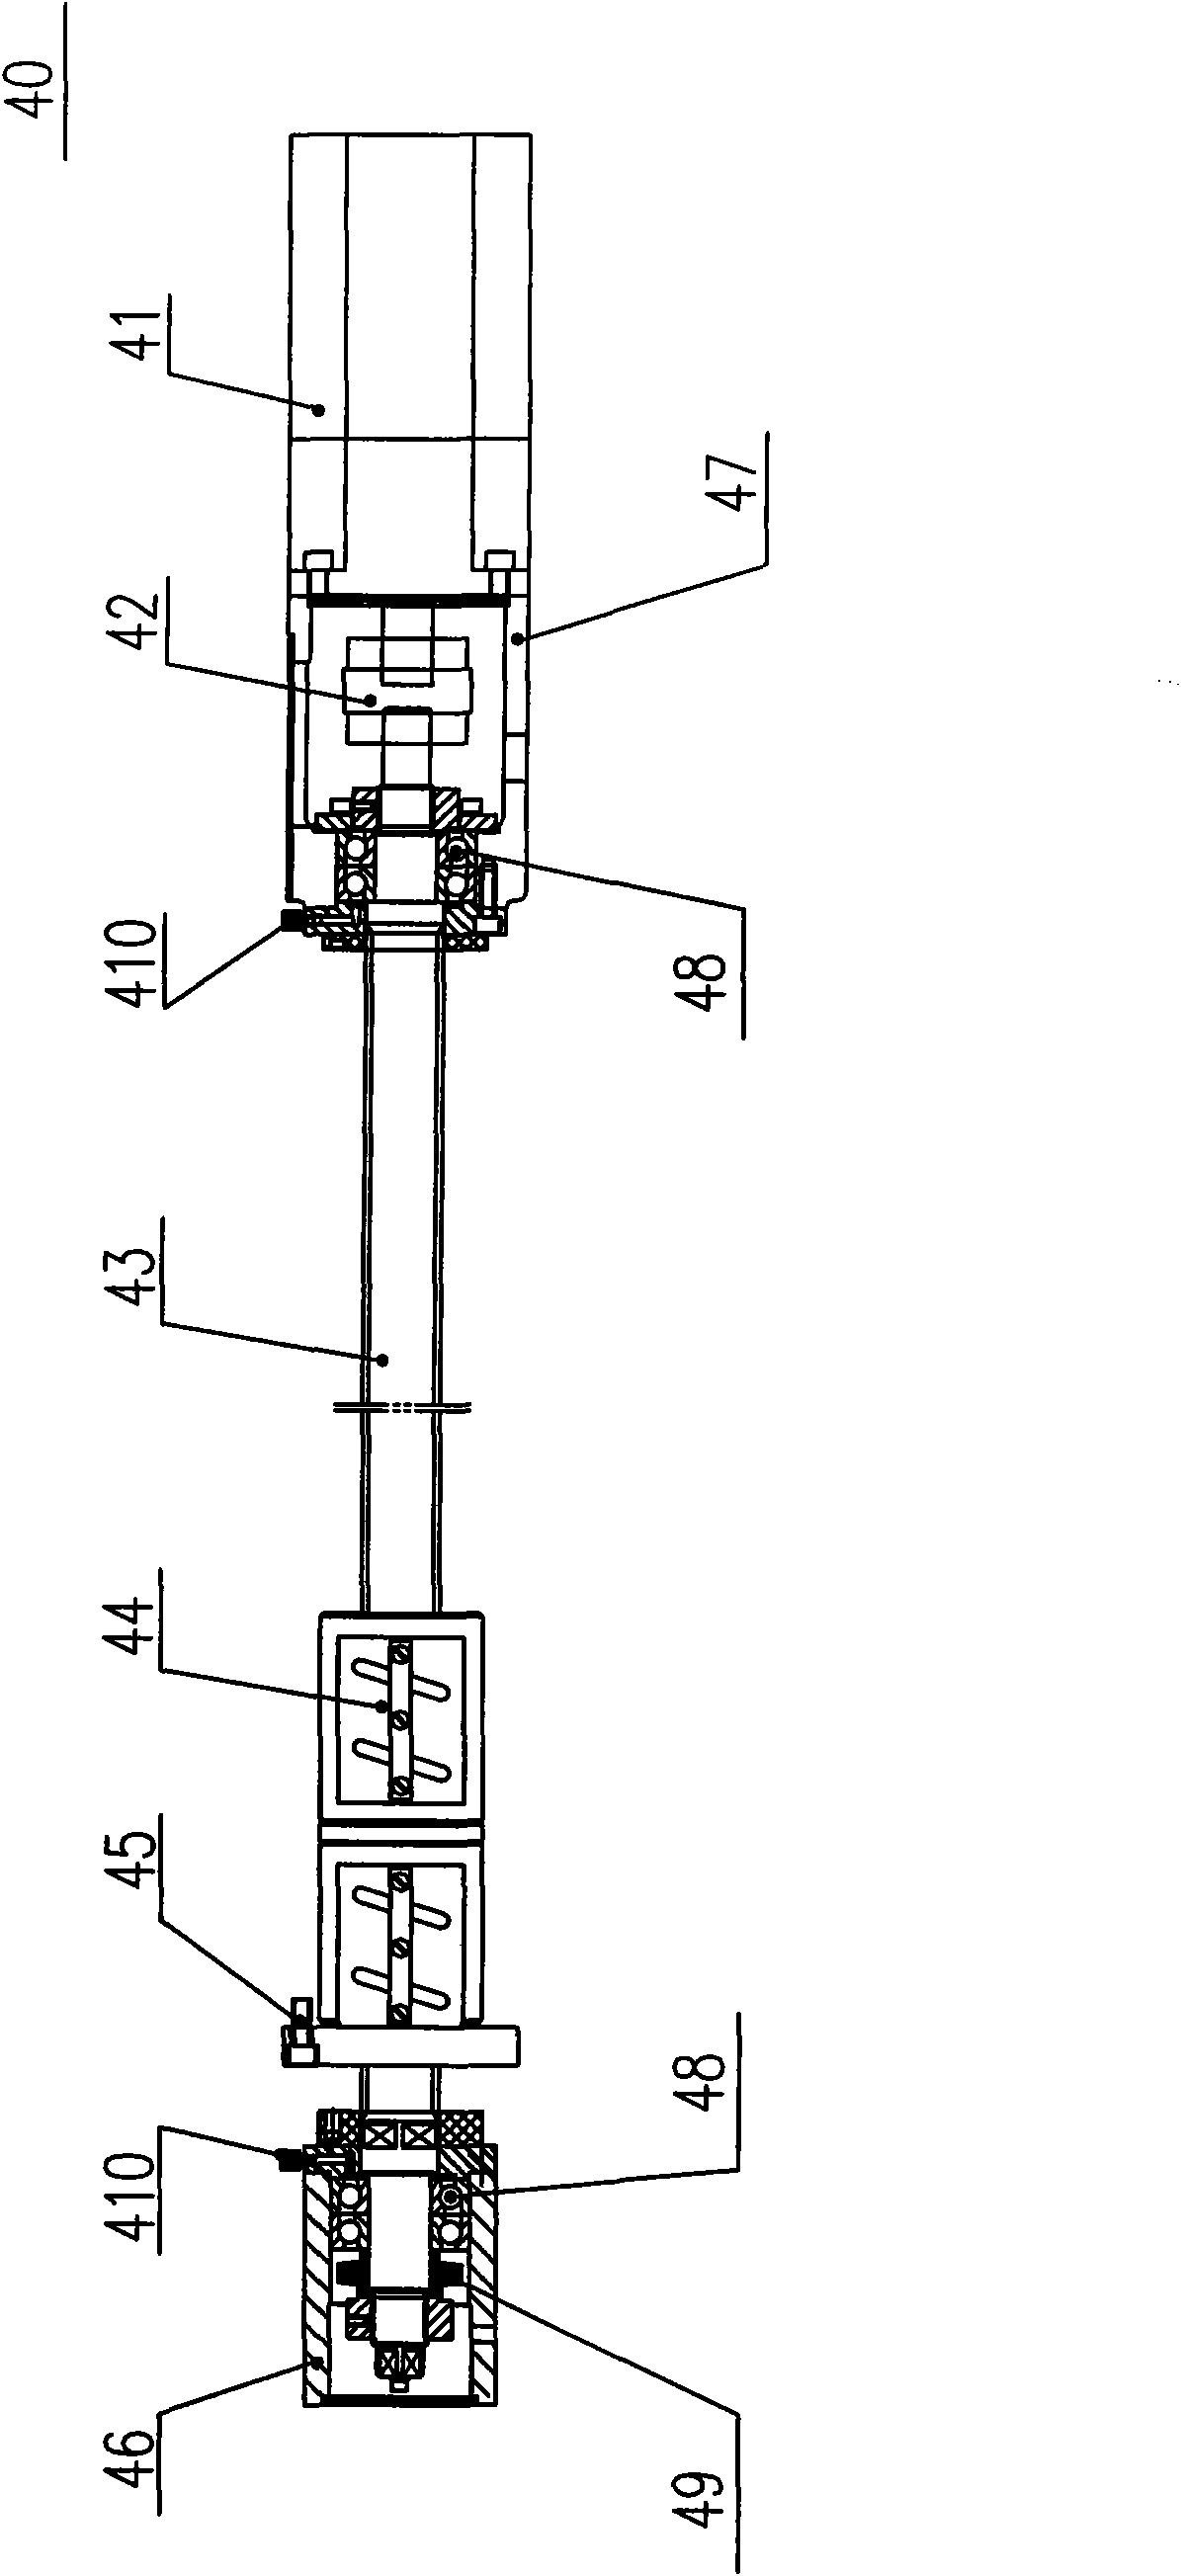 Numerical control abrasive belt grinding machine with six-axis linkage